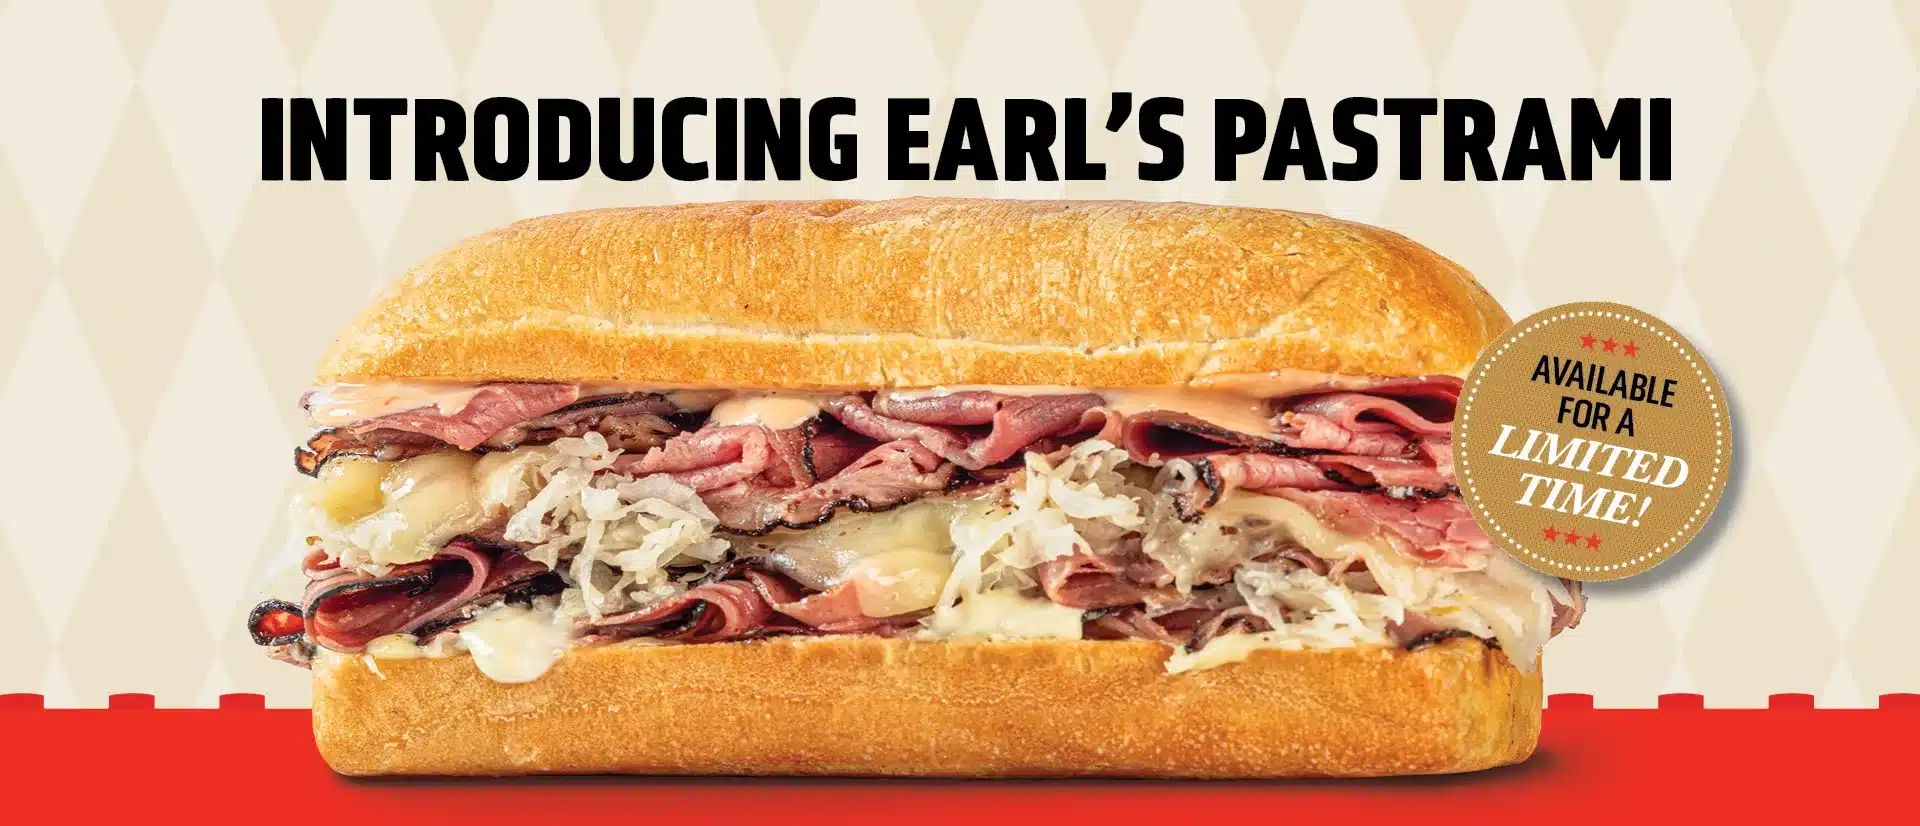 Introducing Earl's Pastrami Available for a limited time!